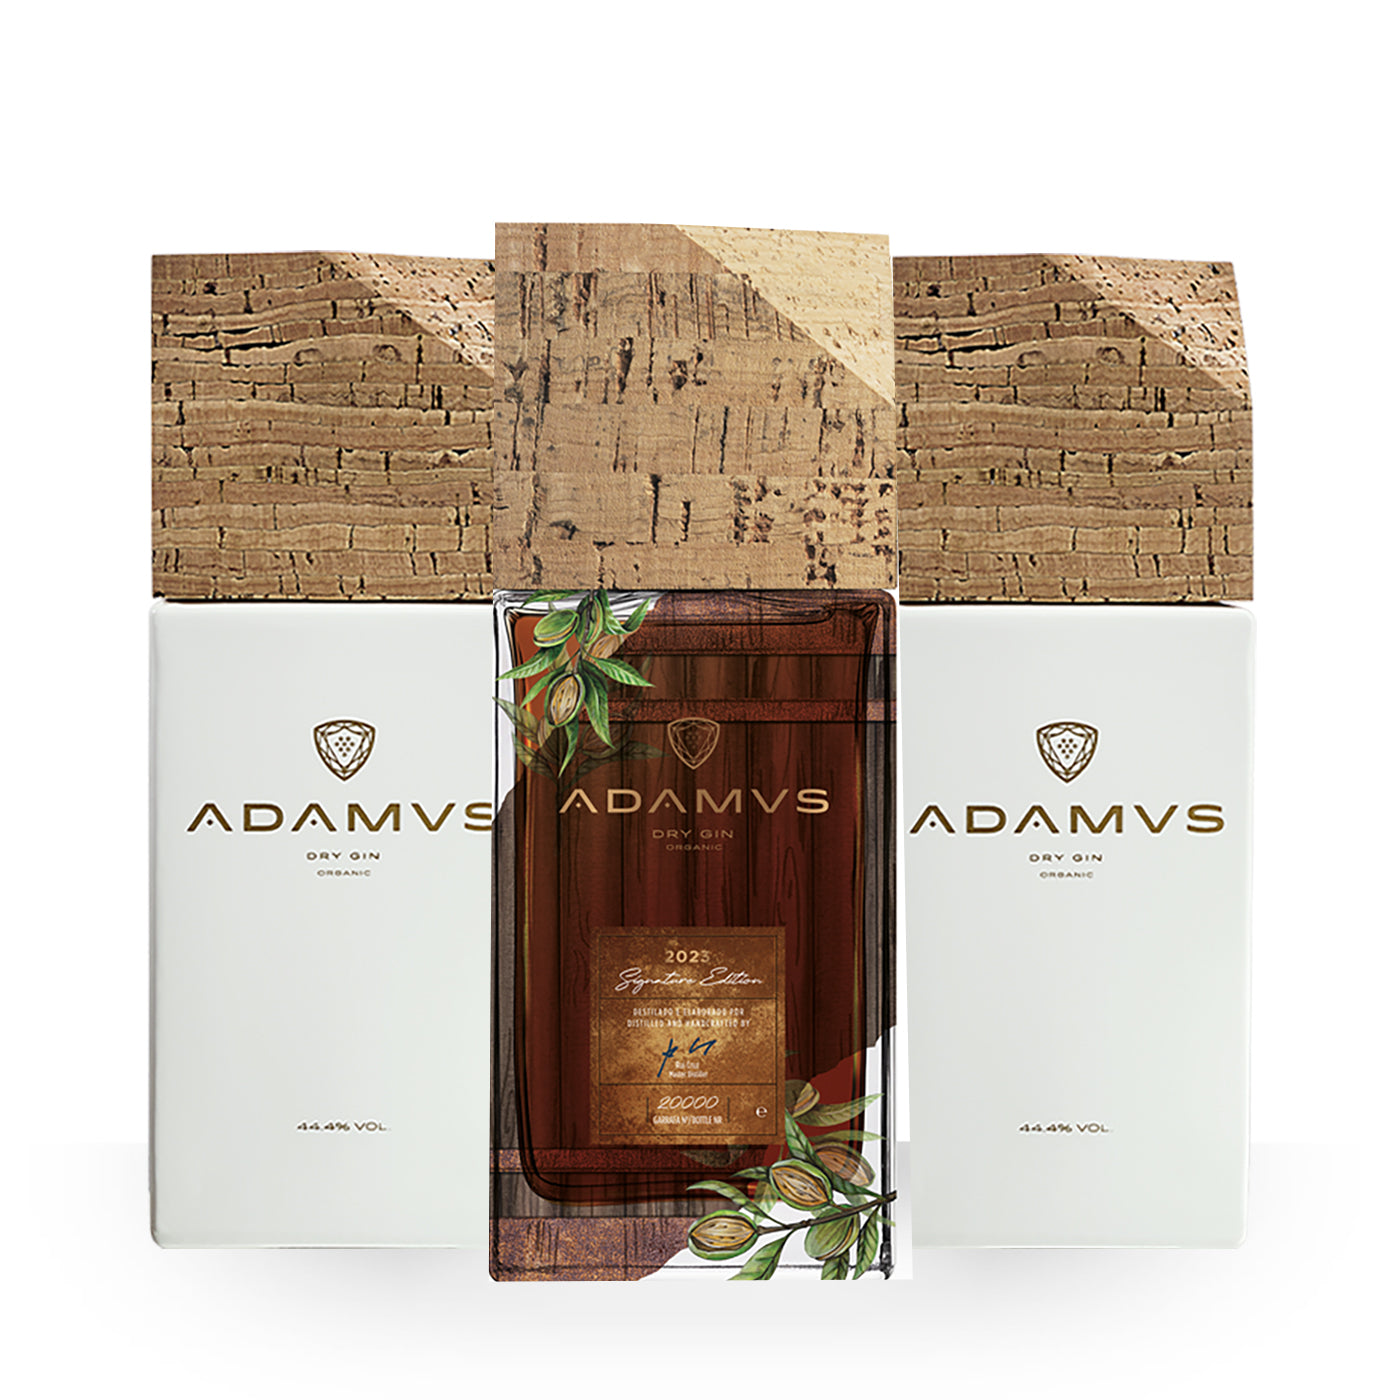 Adamus Pack of 2 Organic Dry Gin 70cl & 1 Signature Edition 2023 70cl